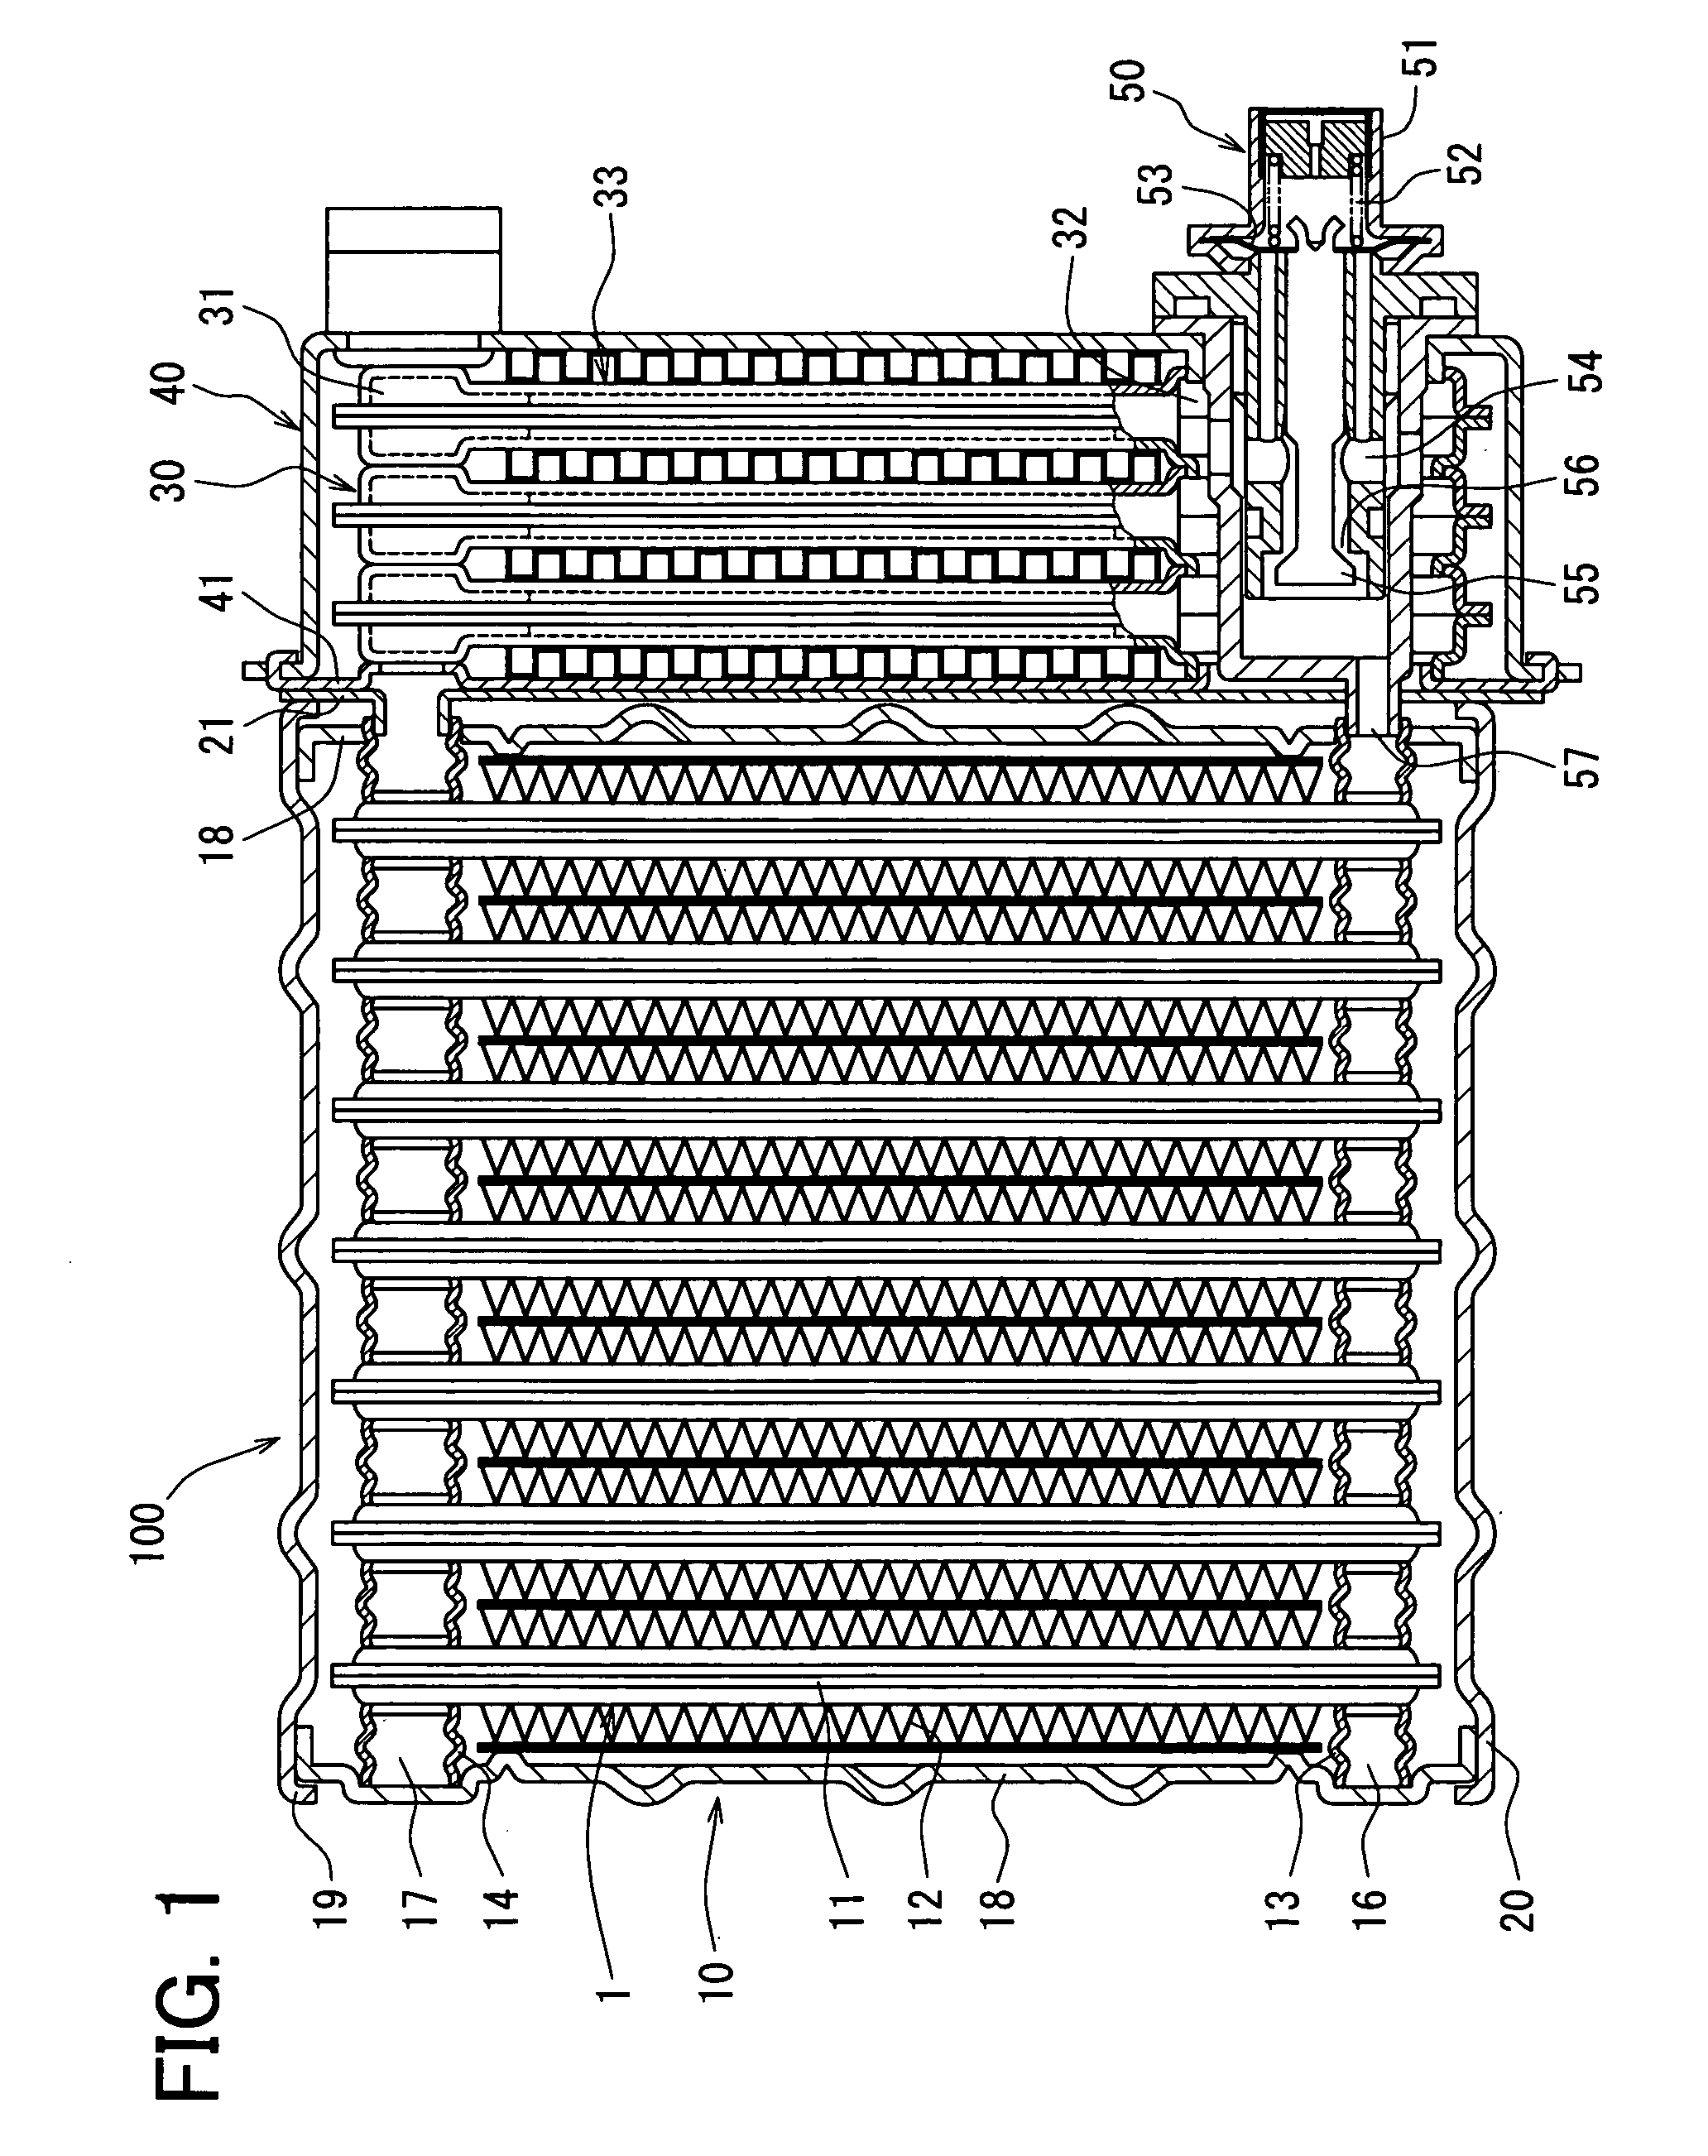 Exhaust heat recovery apparatus